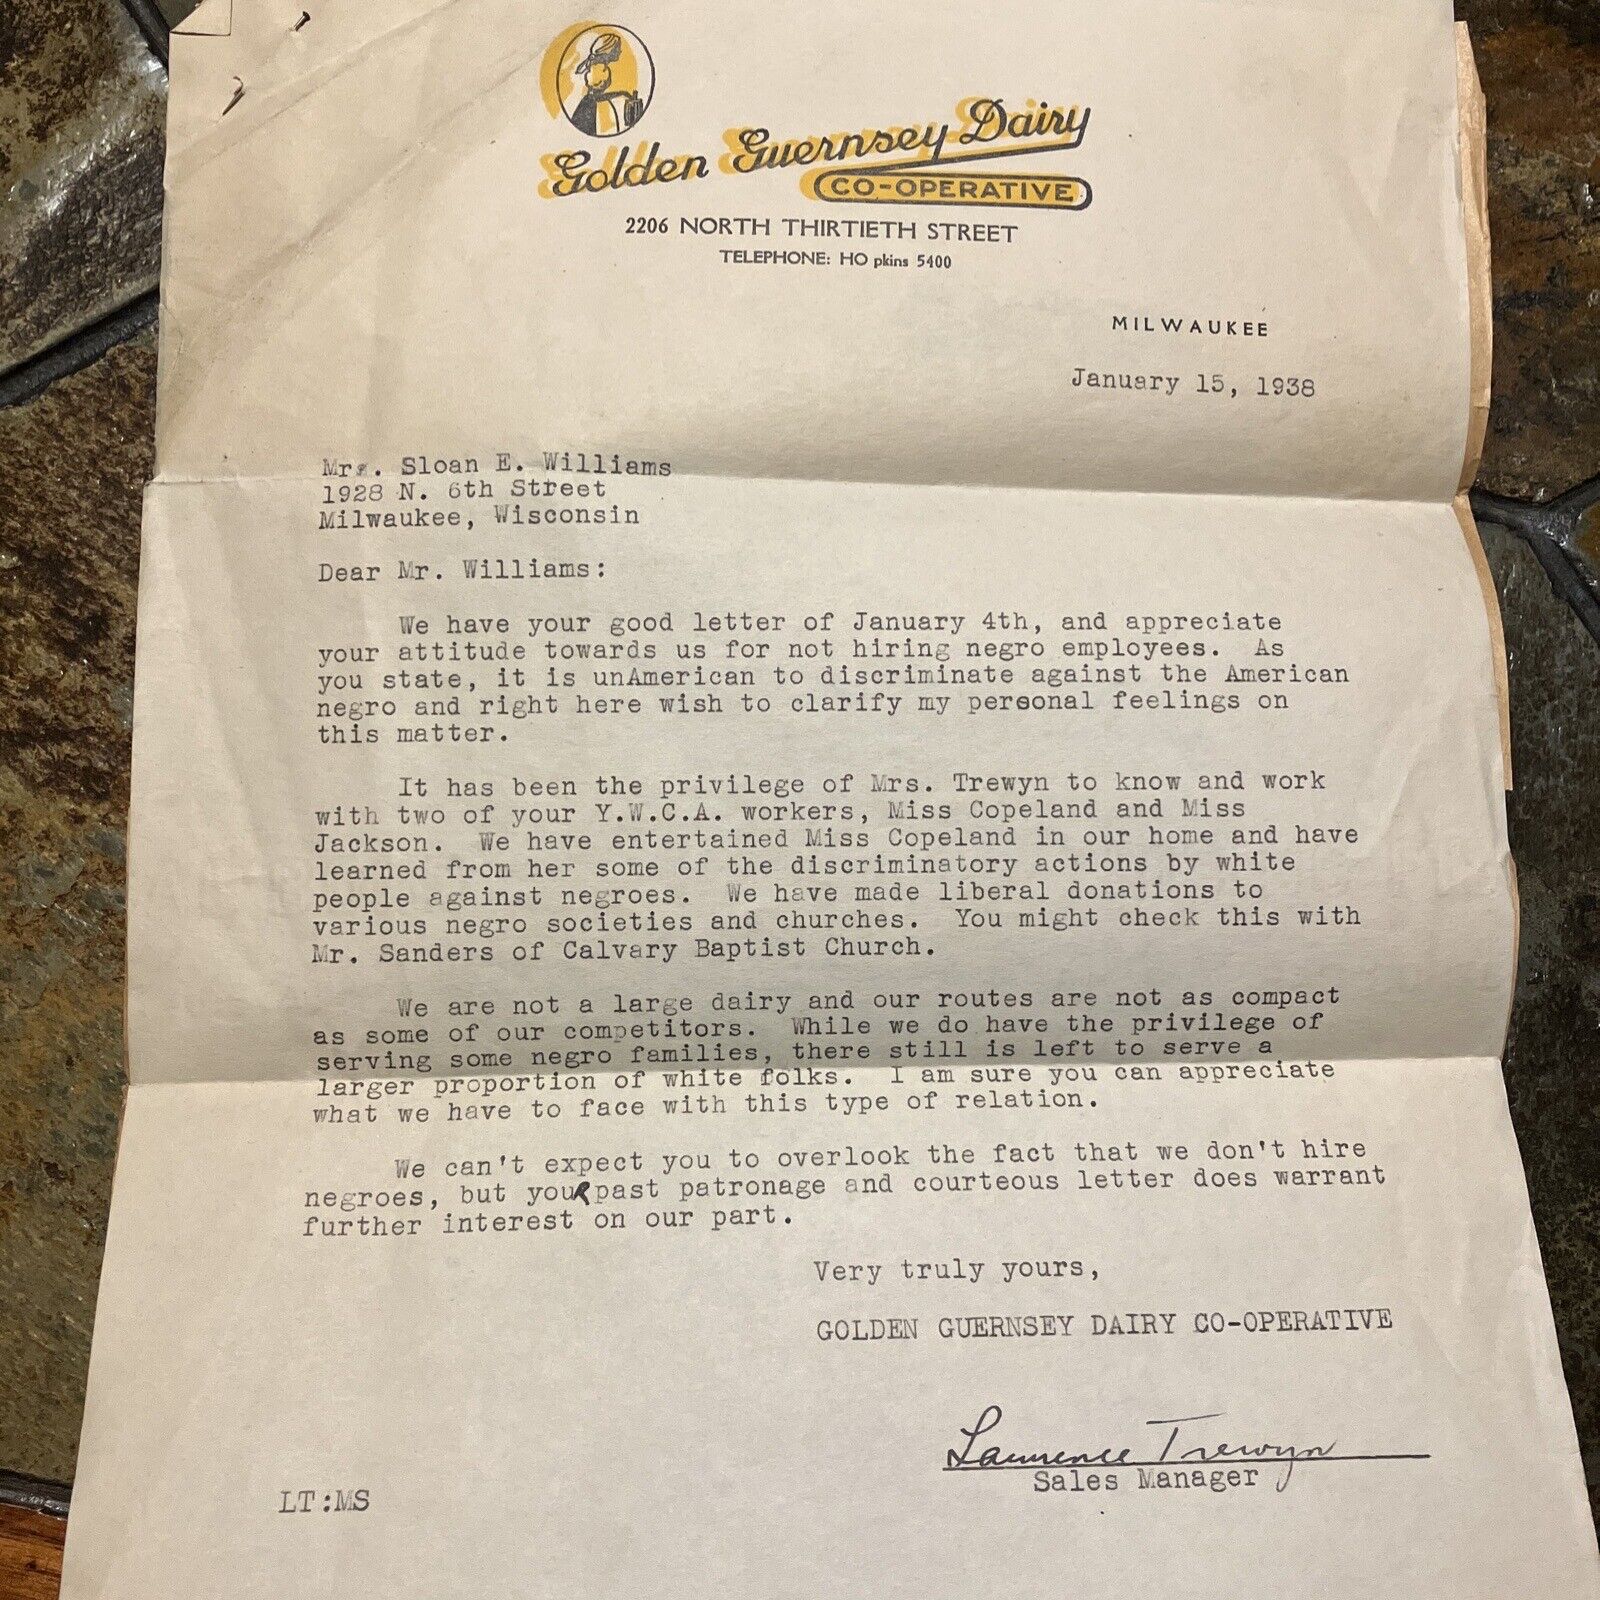 1938 Golden Guernsey Dairy Letter (Q&A) Exp The Non Hiring Of African Americans